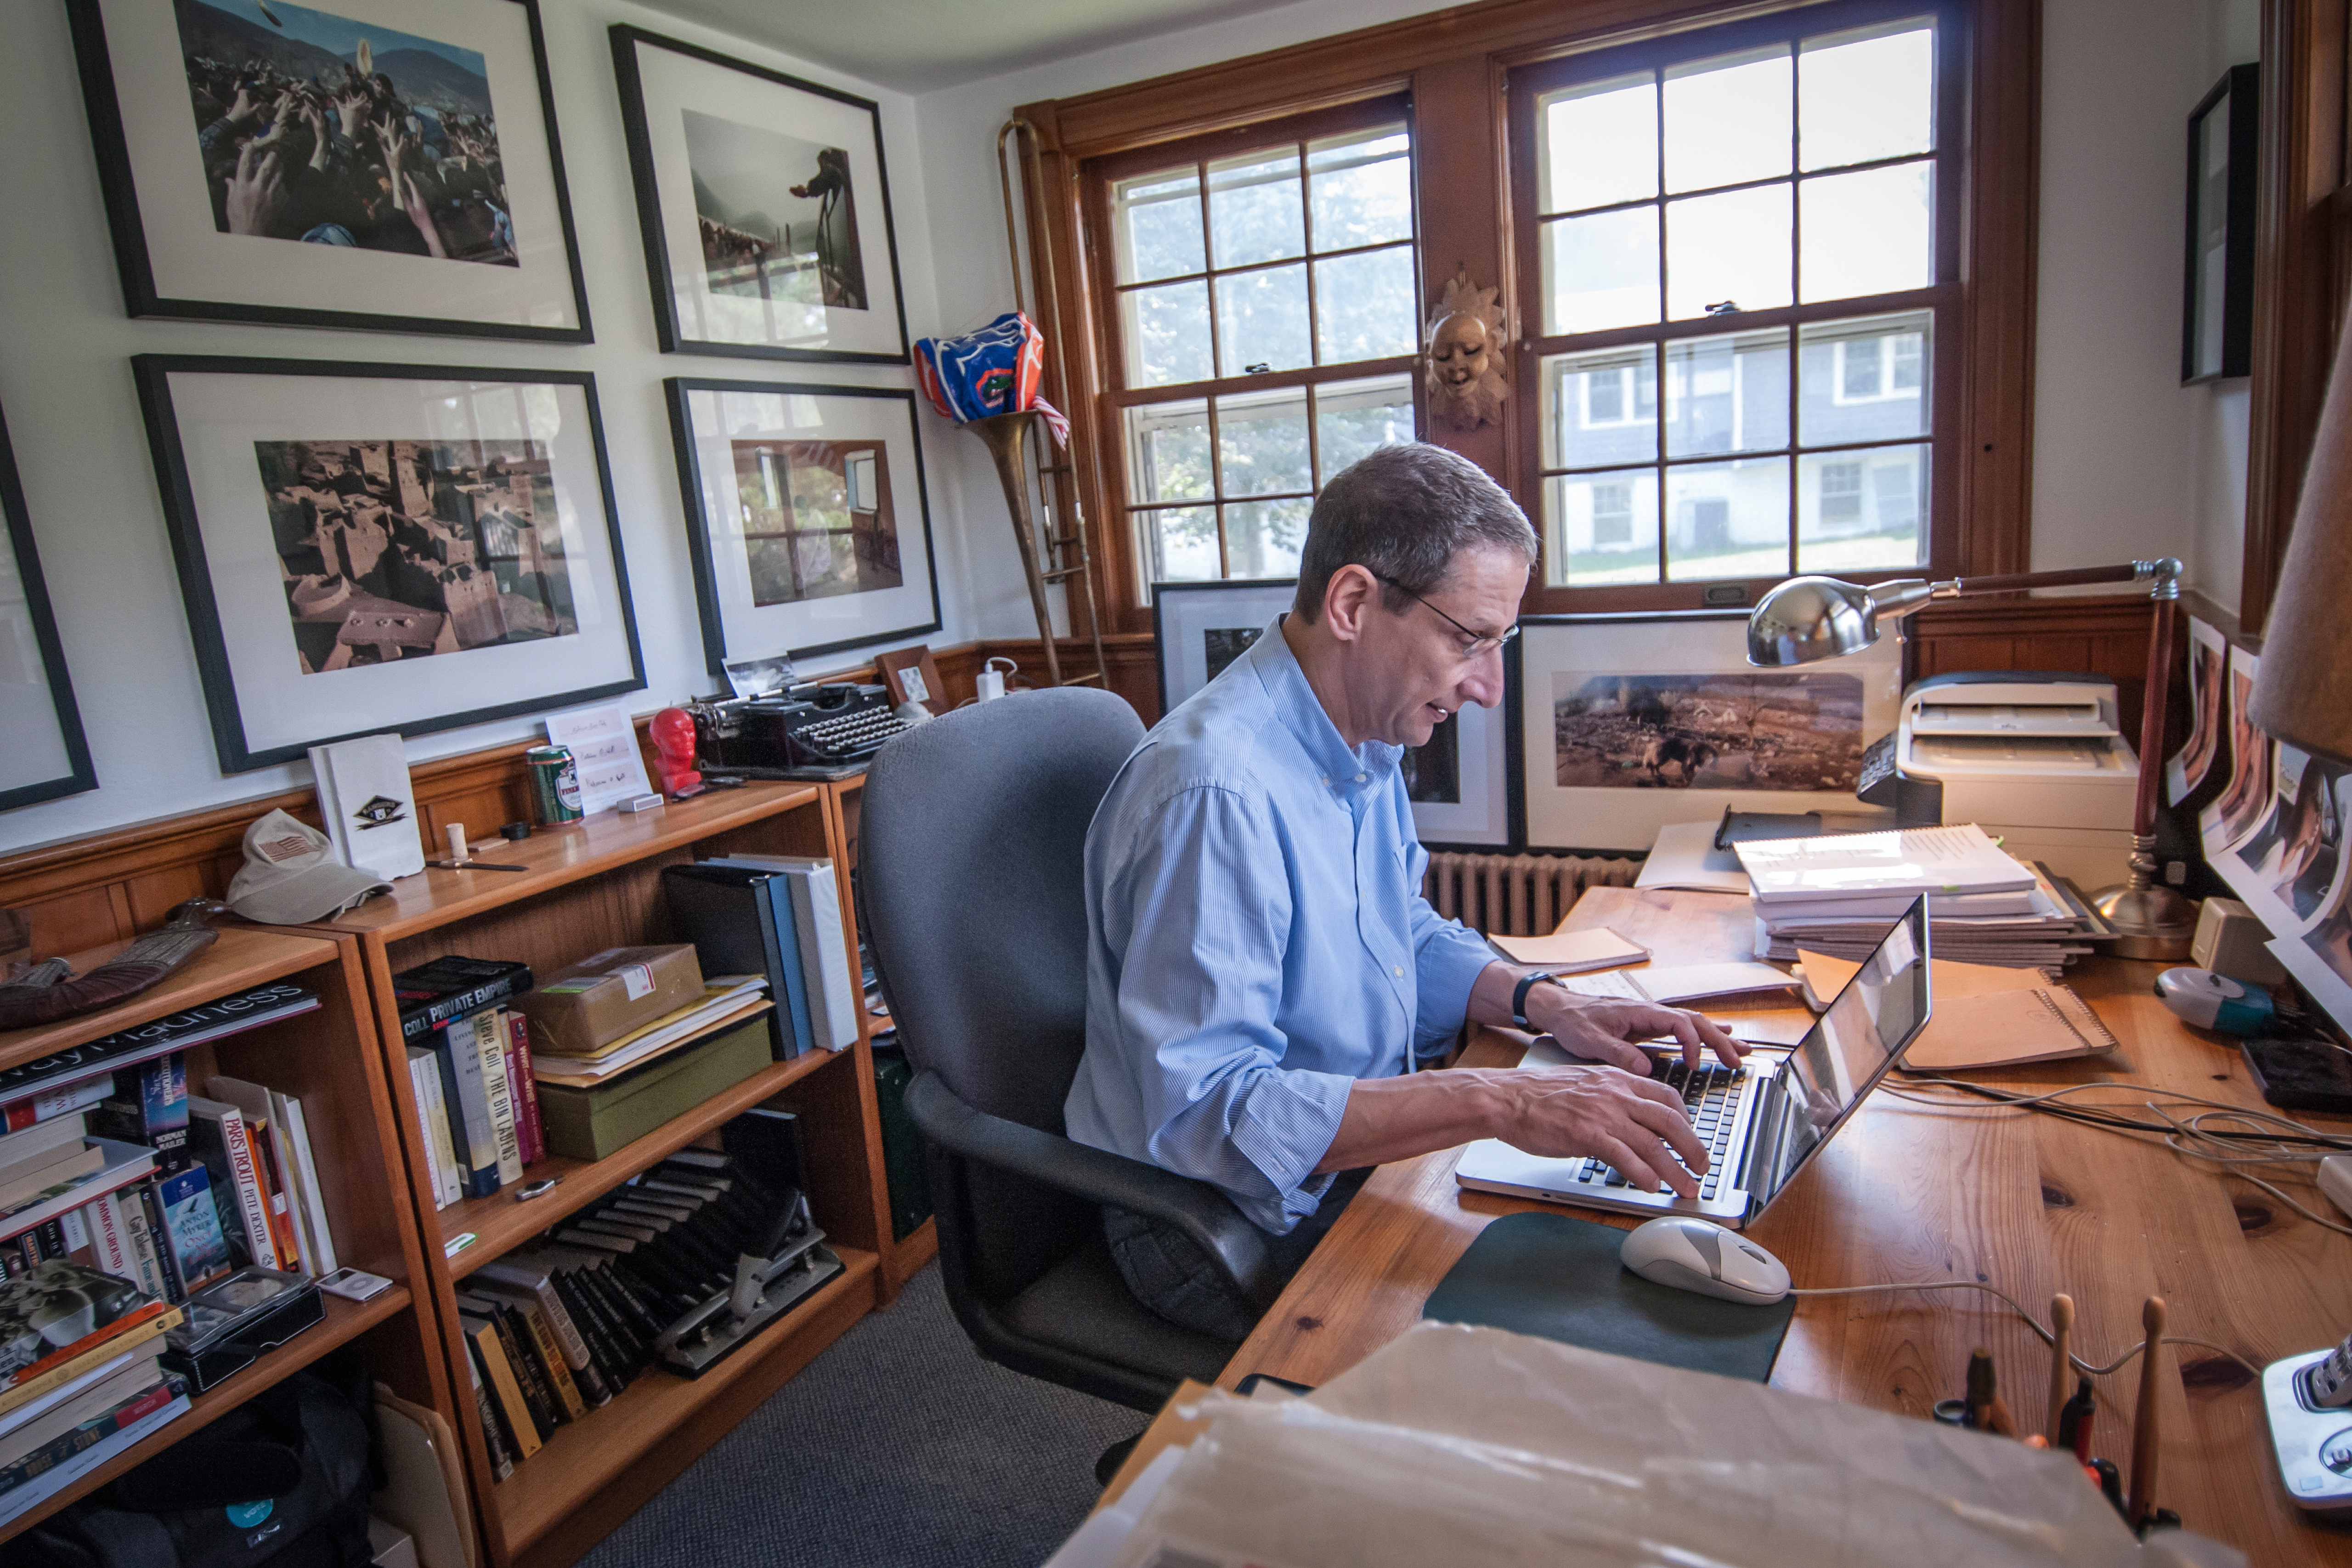 David Finkel, shown in his home office, would rather observe his subjects than interview them